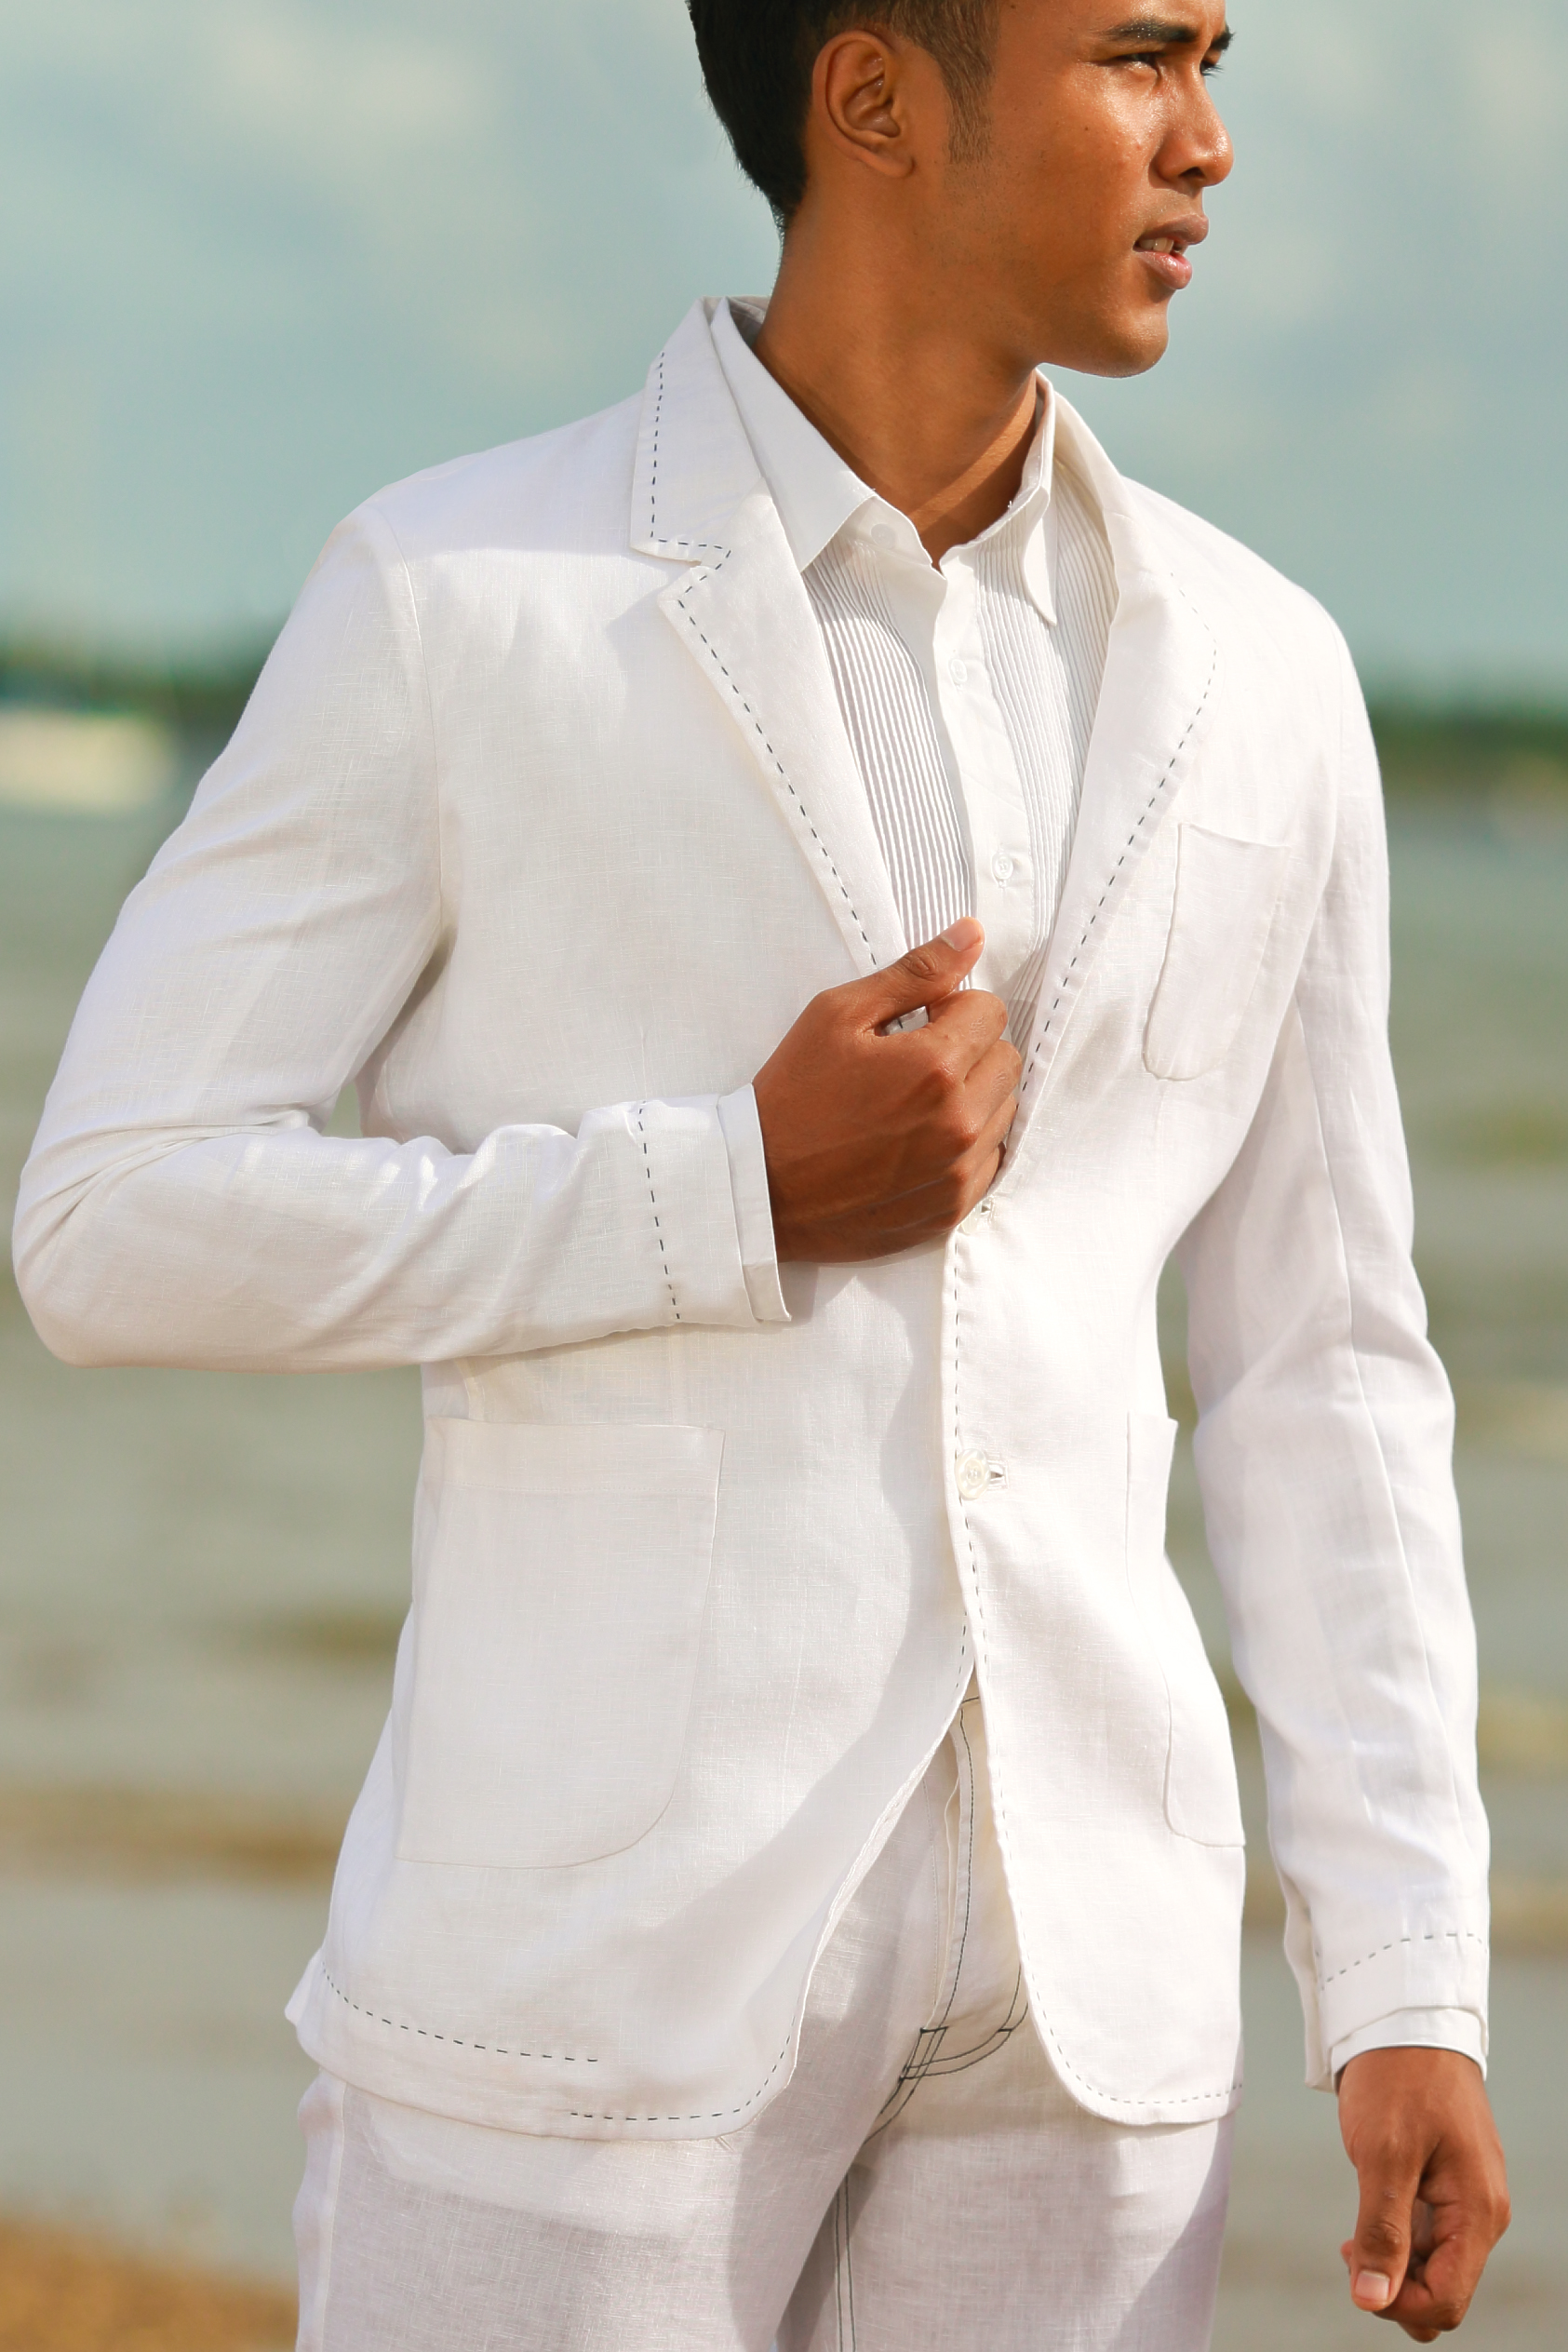 mens linen suits for weddings